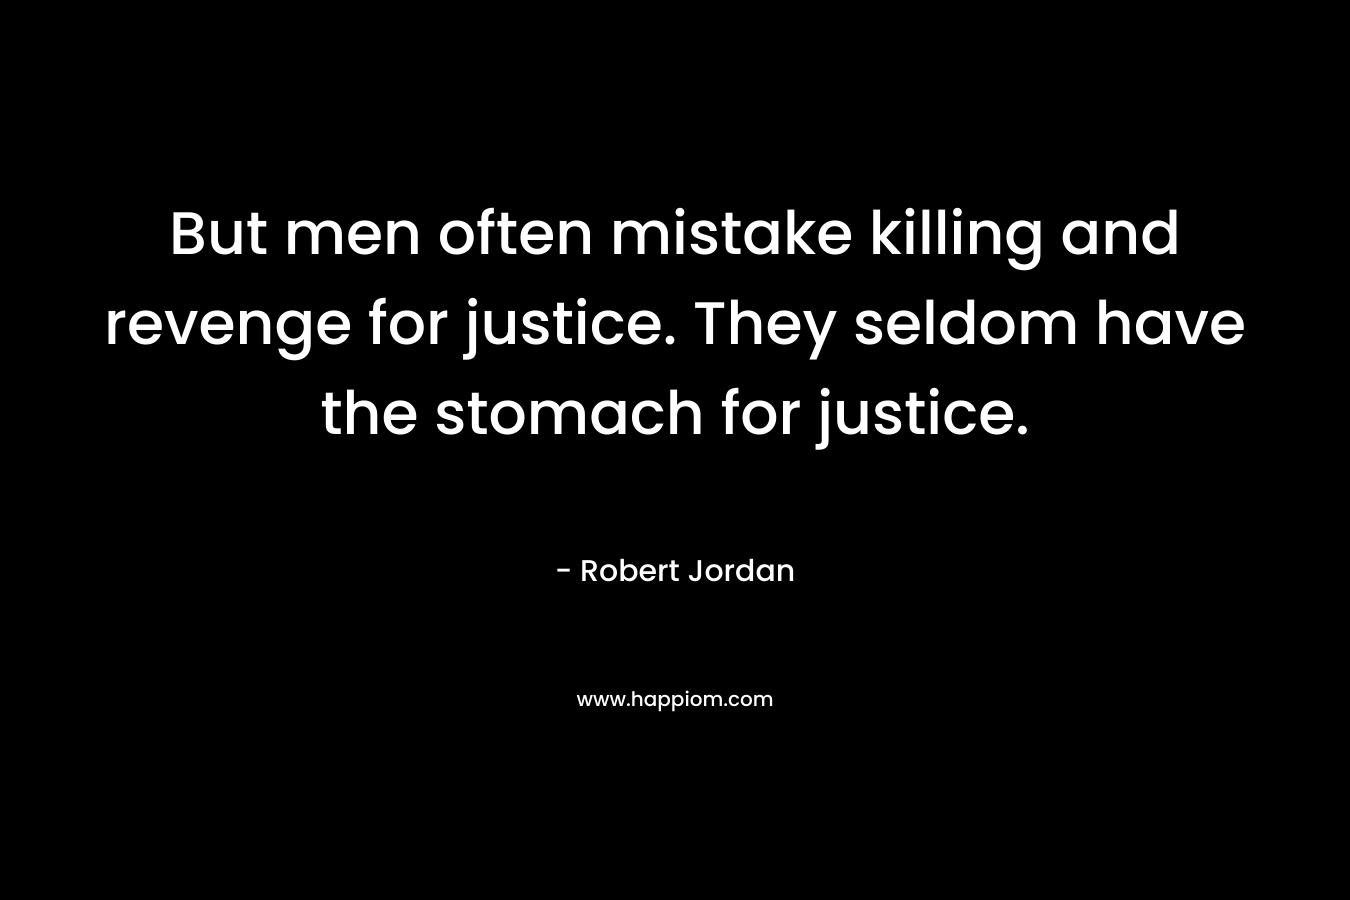 But men often mistake killing and revenge for justice. They seldom have the stomach for justice.